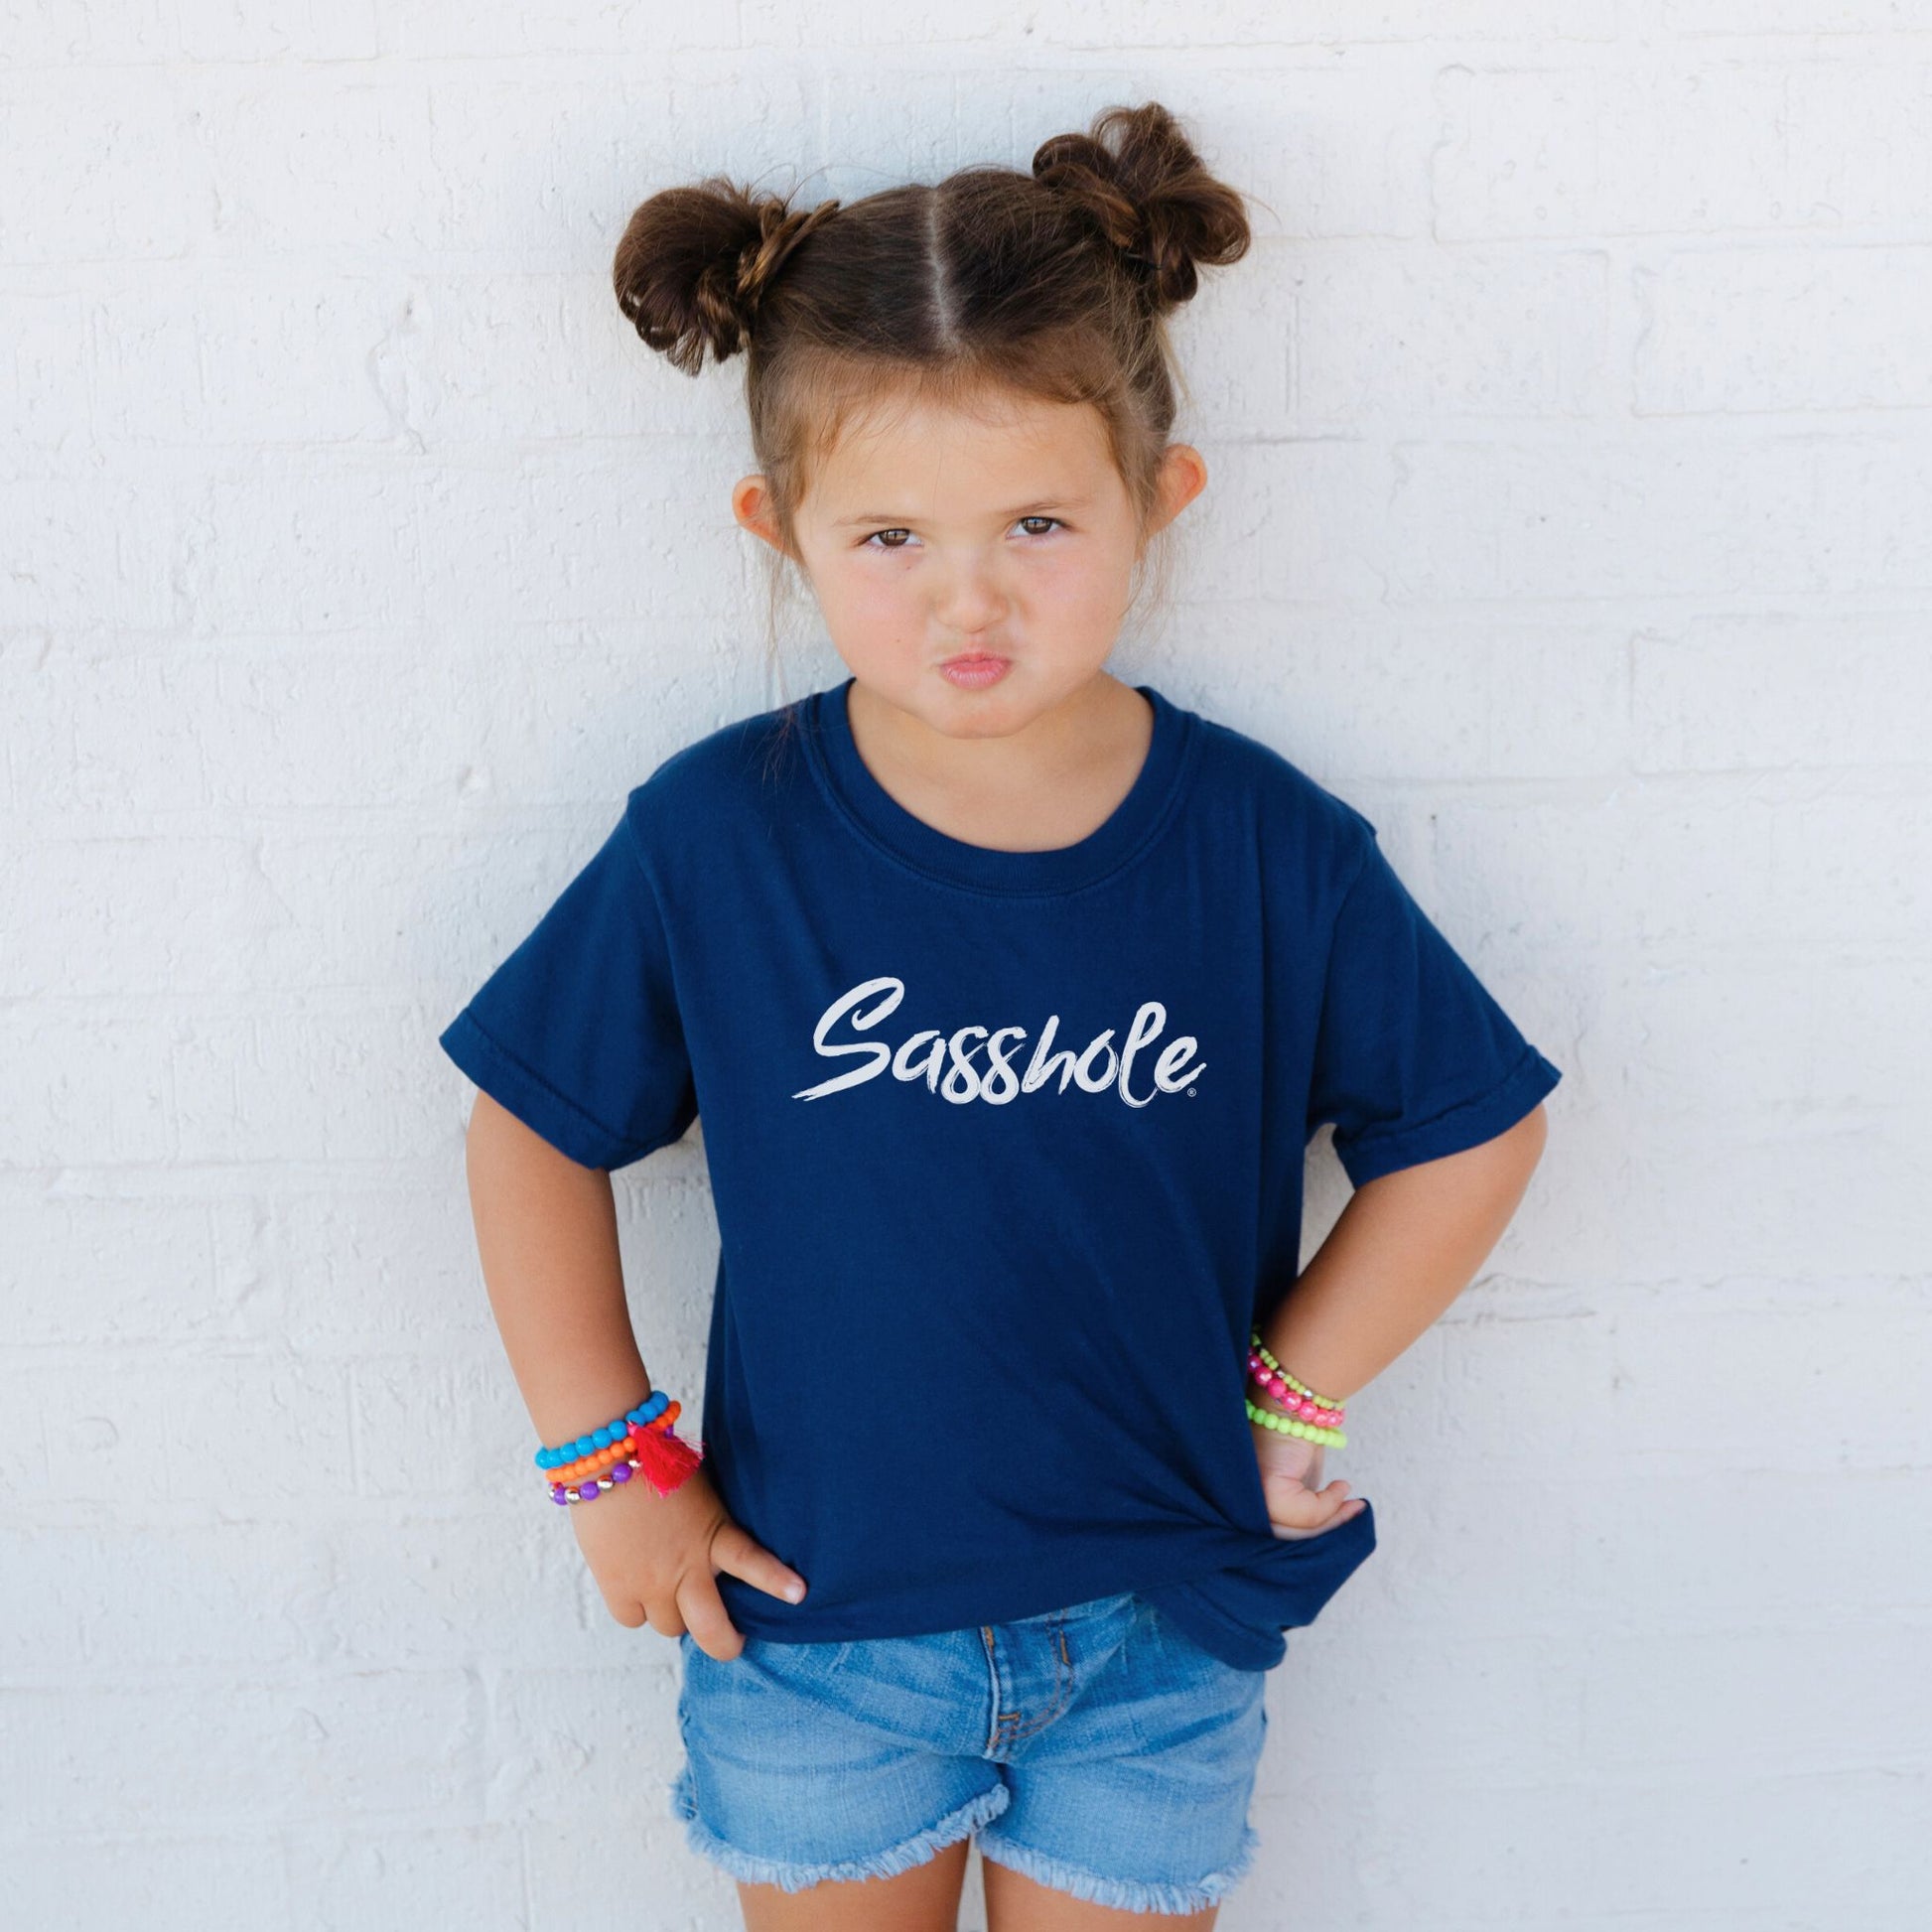 youth girls t-shirt, youth girl casual wear, youth clothing variety, youth clothing essentials, whimsical graphic design, vibrant youth styles, vibrant youth apparel, Unisex, unique kids clothing, unique graphic print style, trendy graphic print fashion, trendy children's apparel, toddler girl statement tee, T-shirts, stylish toddler outfitm, stylish graphic tee for girls, statement tee for girls, sassy youth fashion, sassy slogan tee, Regular fit